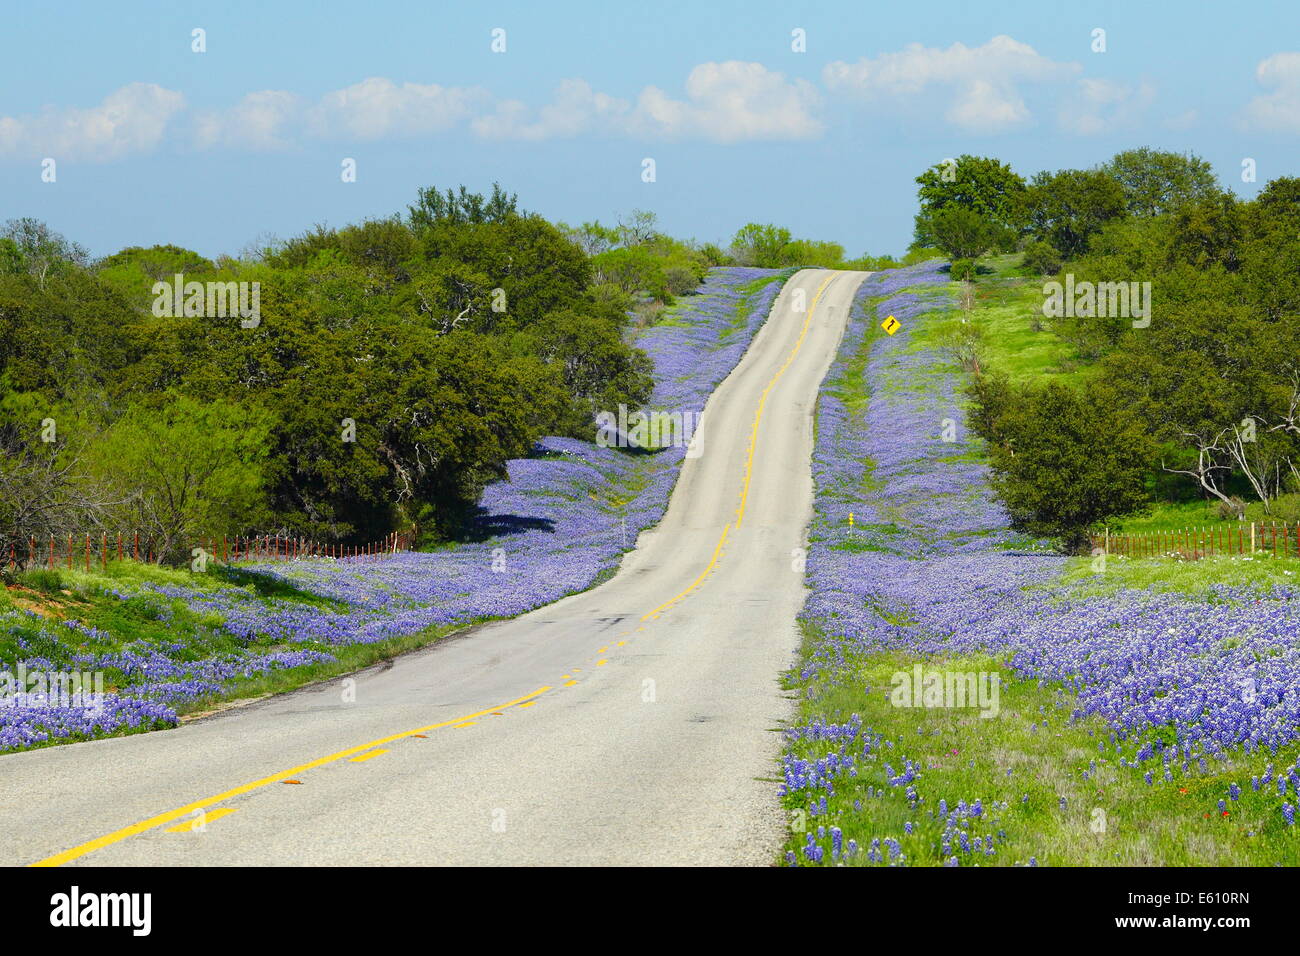 Bluebonnets adorn the side of Hwy 152 in the hill country of Texas, USA. Stock Photo